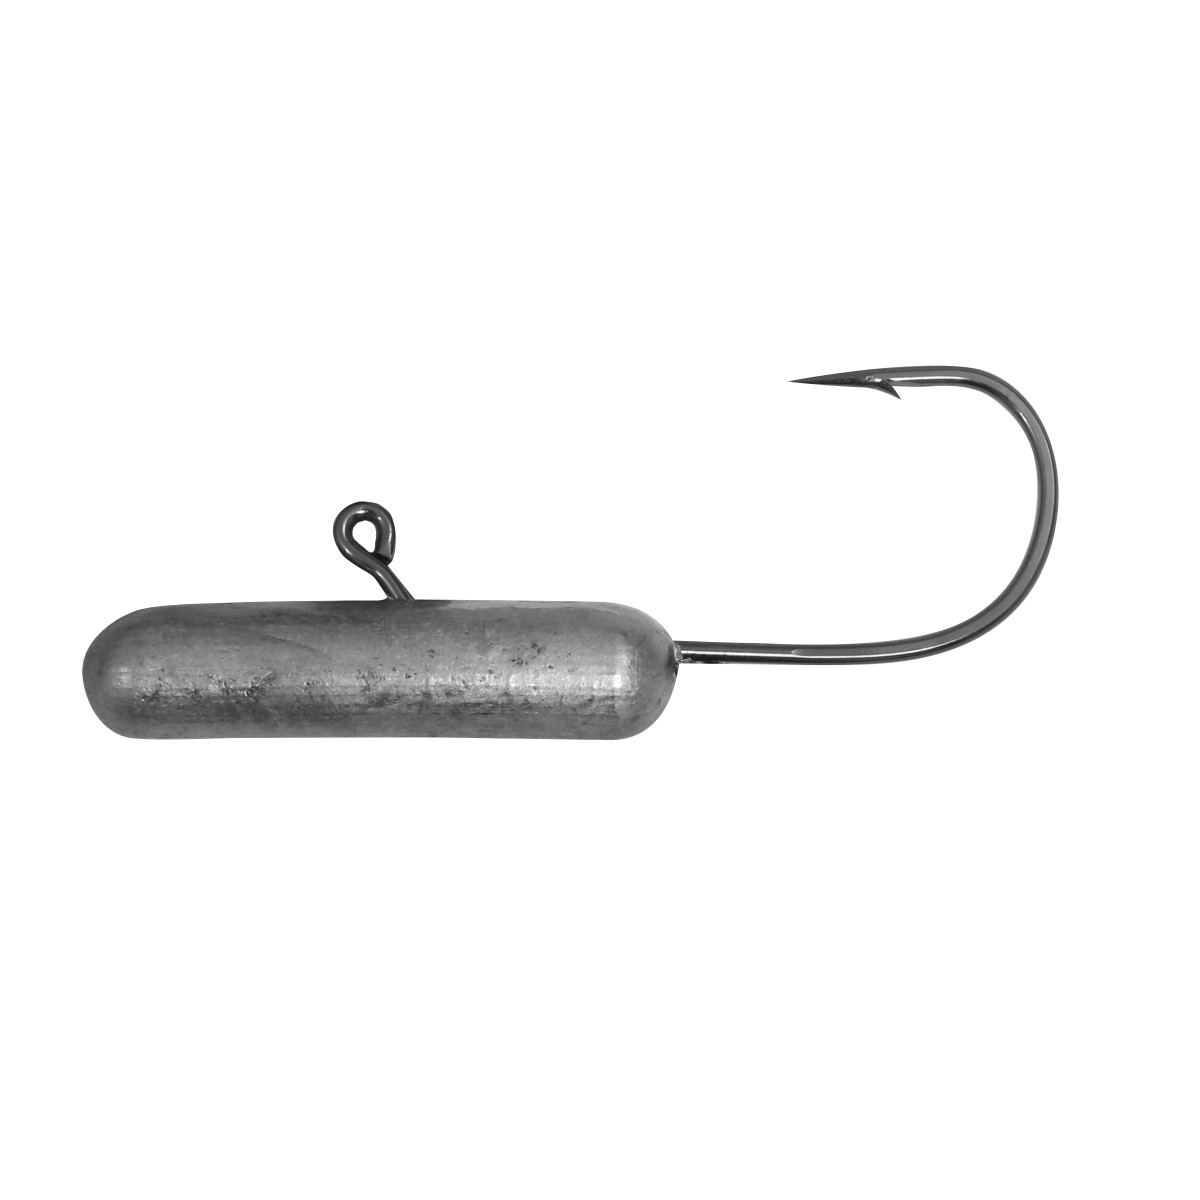 Northland Fishing Tackle Fire-Ball Spin Jig